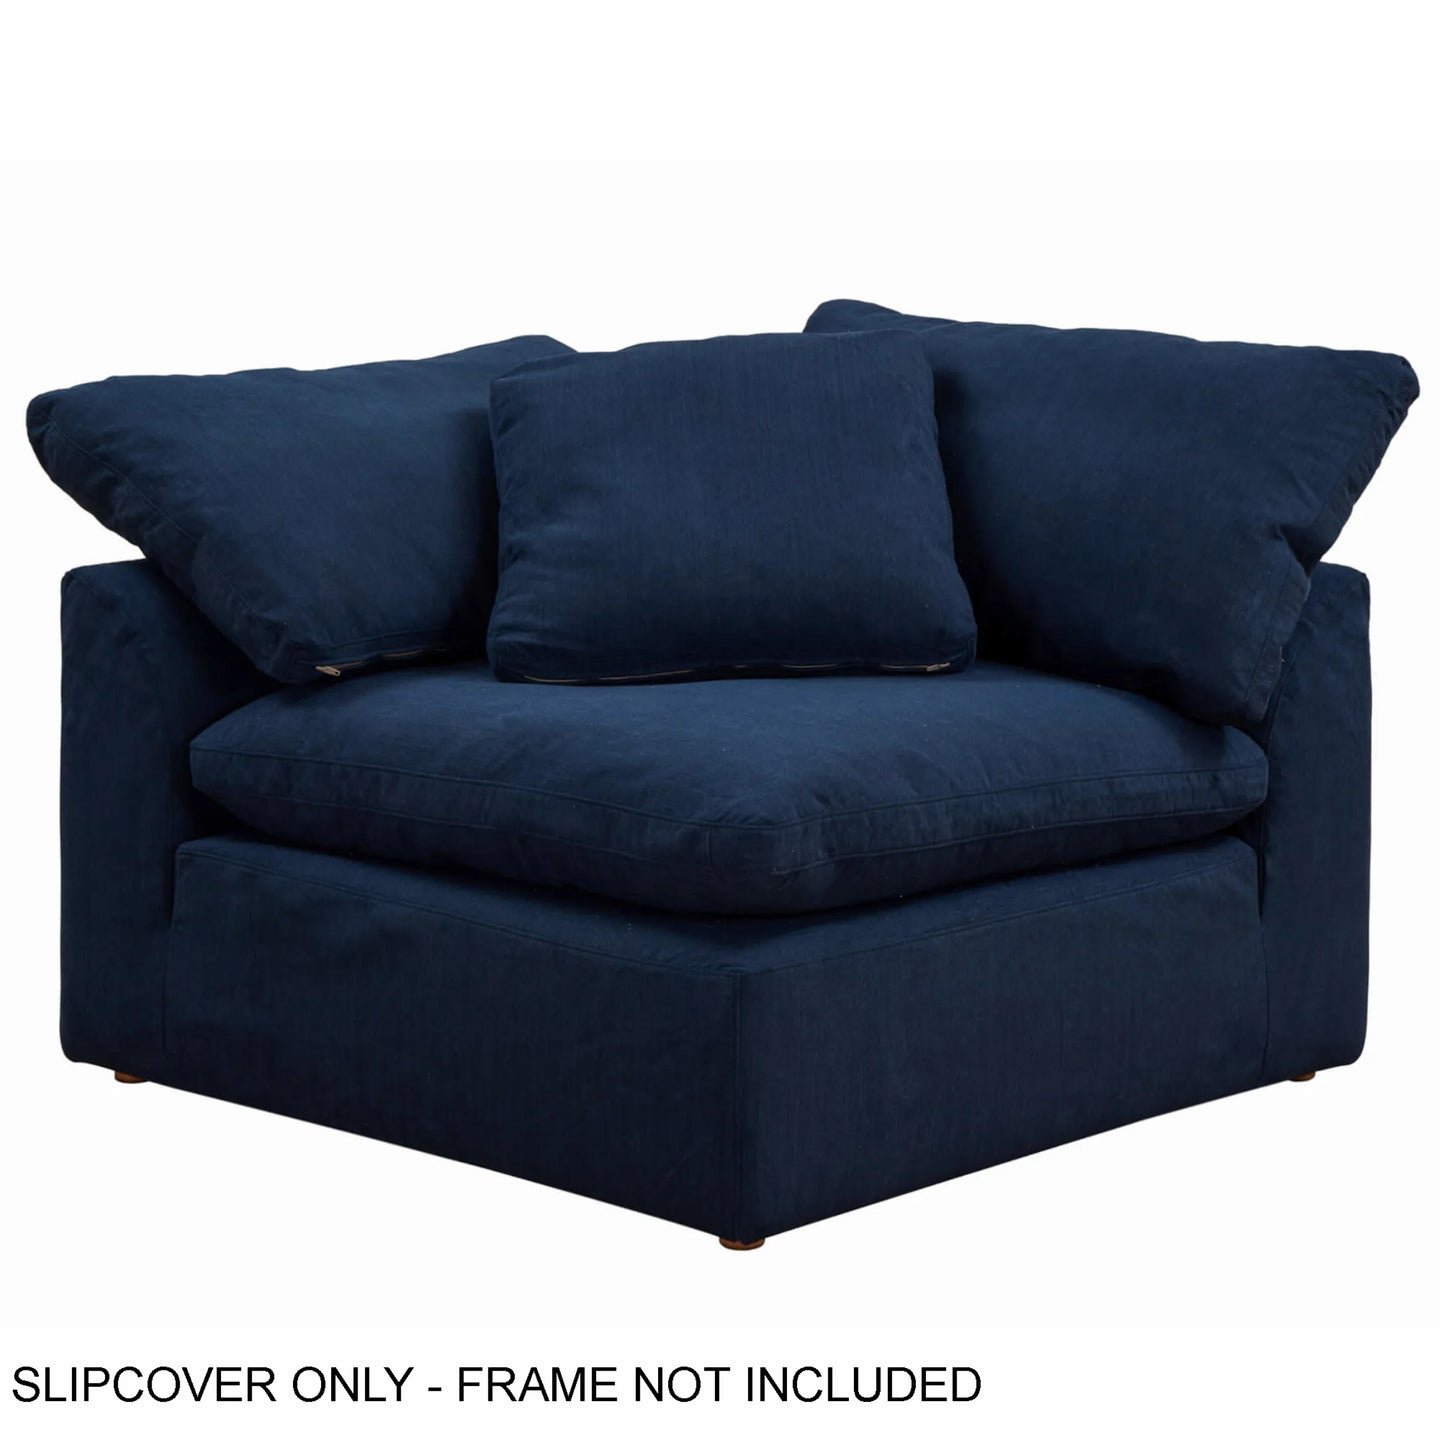 Sunset Trading Cloud Puff Slipcover for 5 Piece Modular Sectional Sofa | Stain Resistant Performance Fabric | Navy Blue